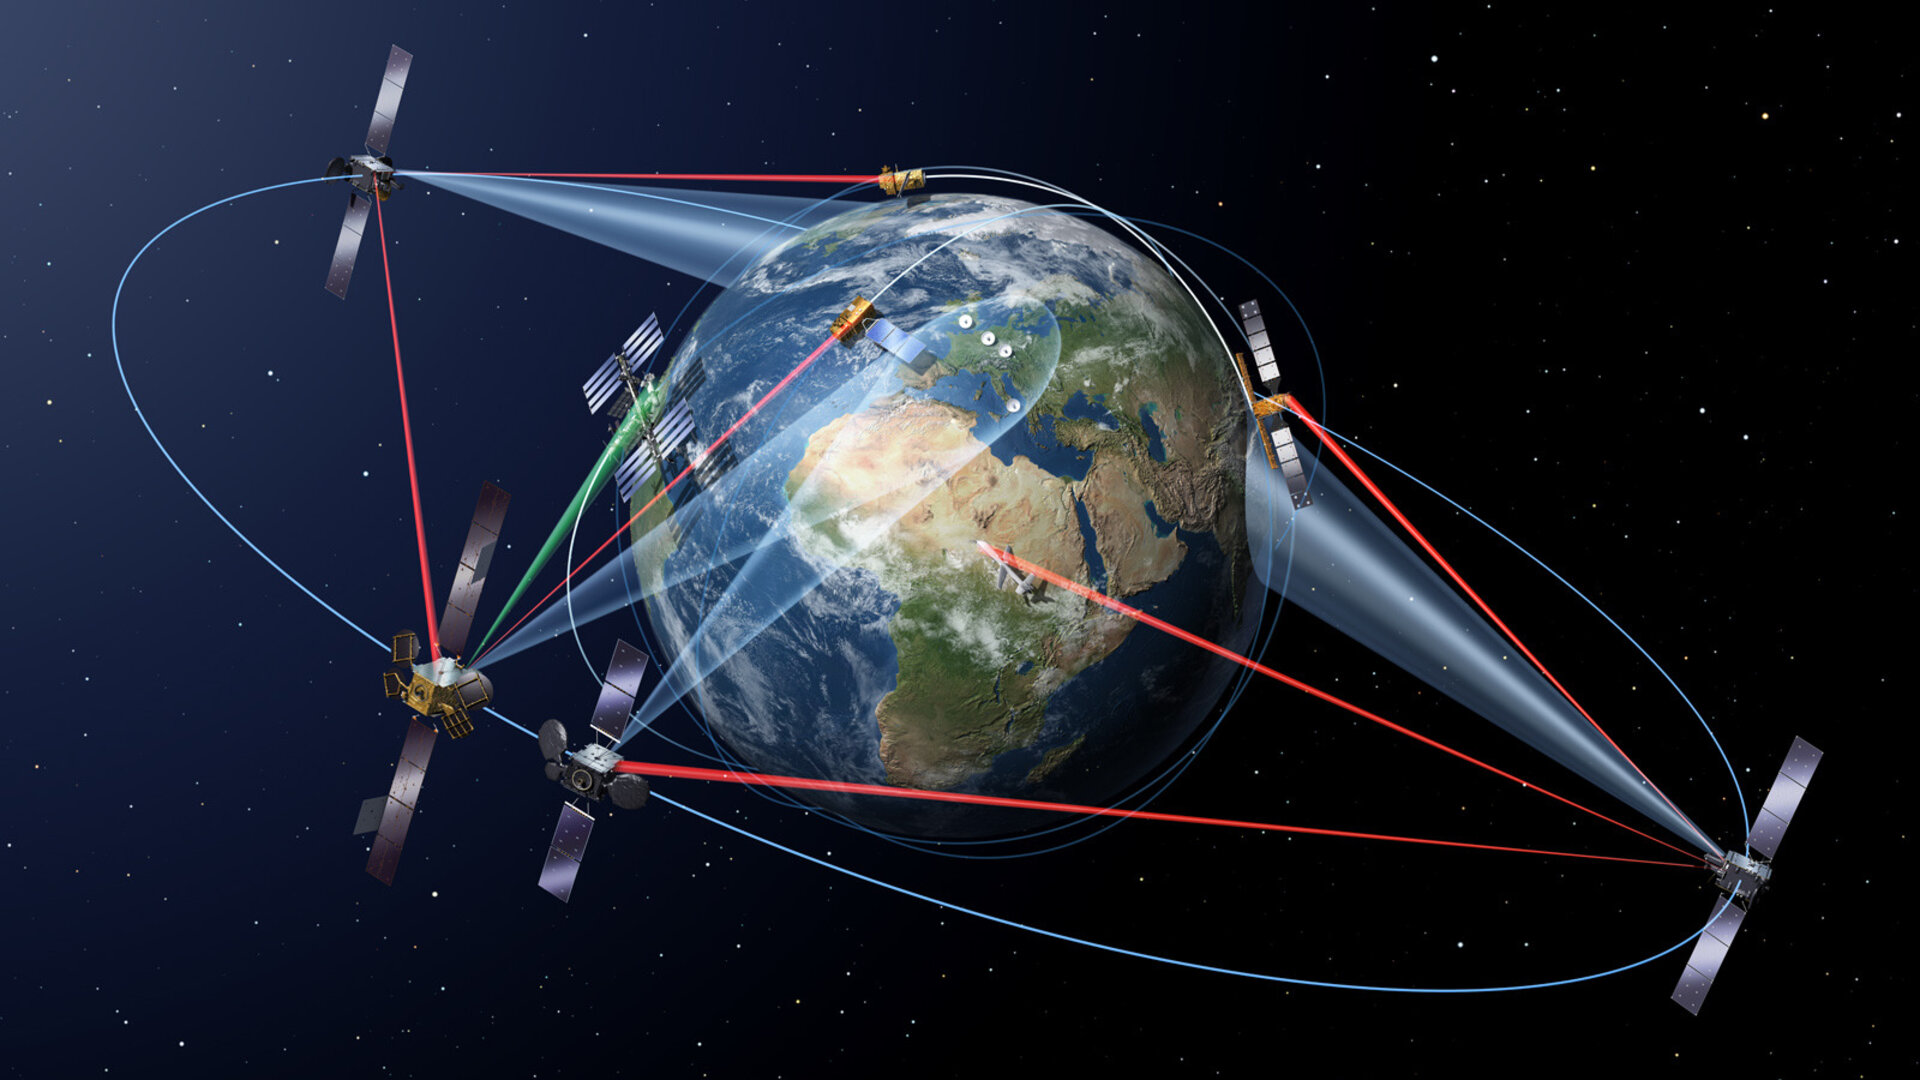 The European Data Relay System (EDRS) uses advanced laser technology to relay information collected by lower orbiting satellites to the Earth via geostationary nodes